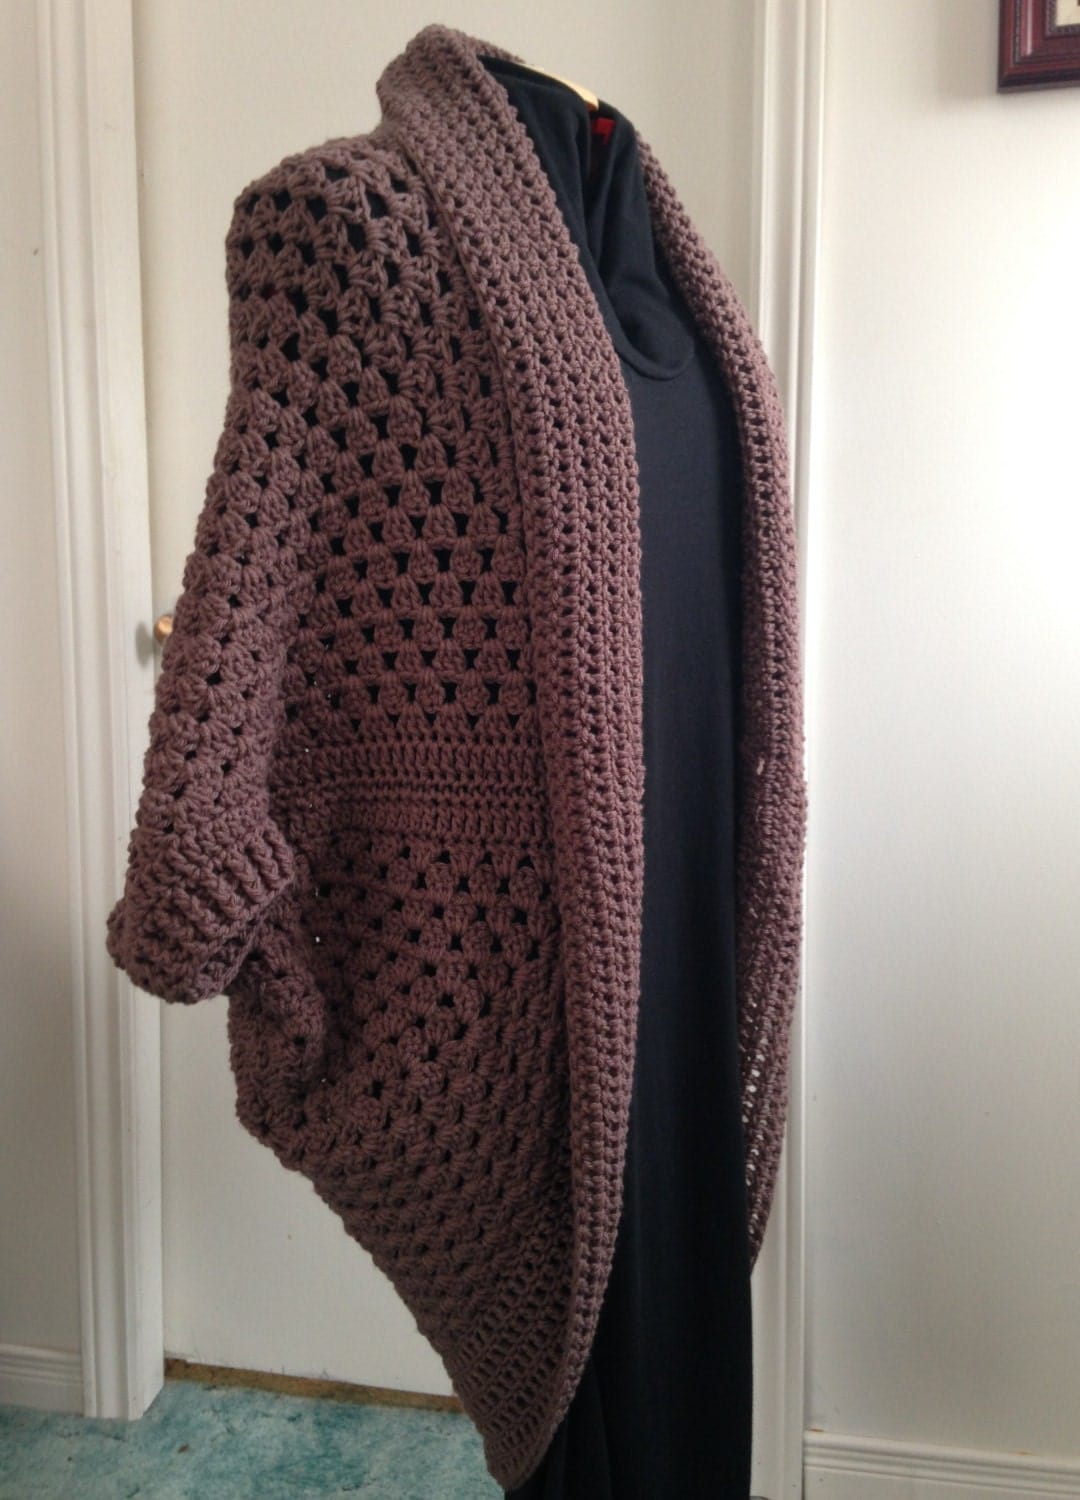 Crochet Granny Square Cocoon Sweater Cardigan Shrug in Taupe